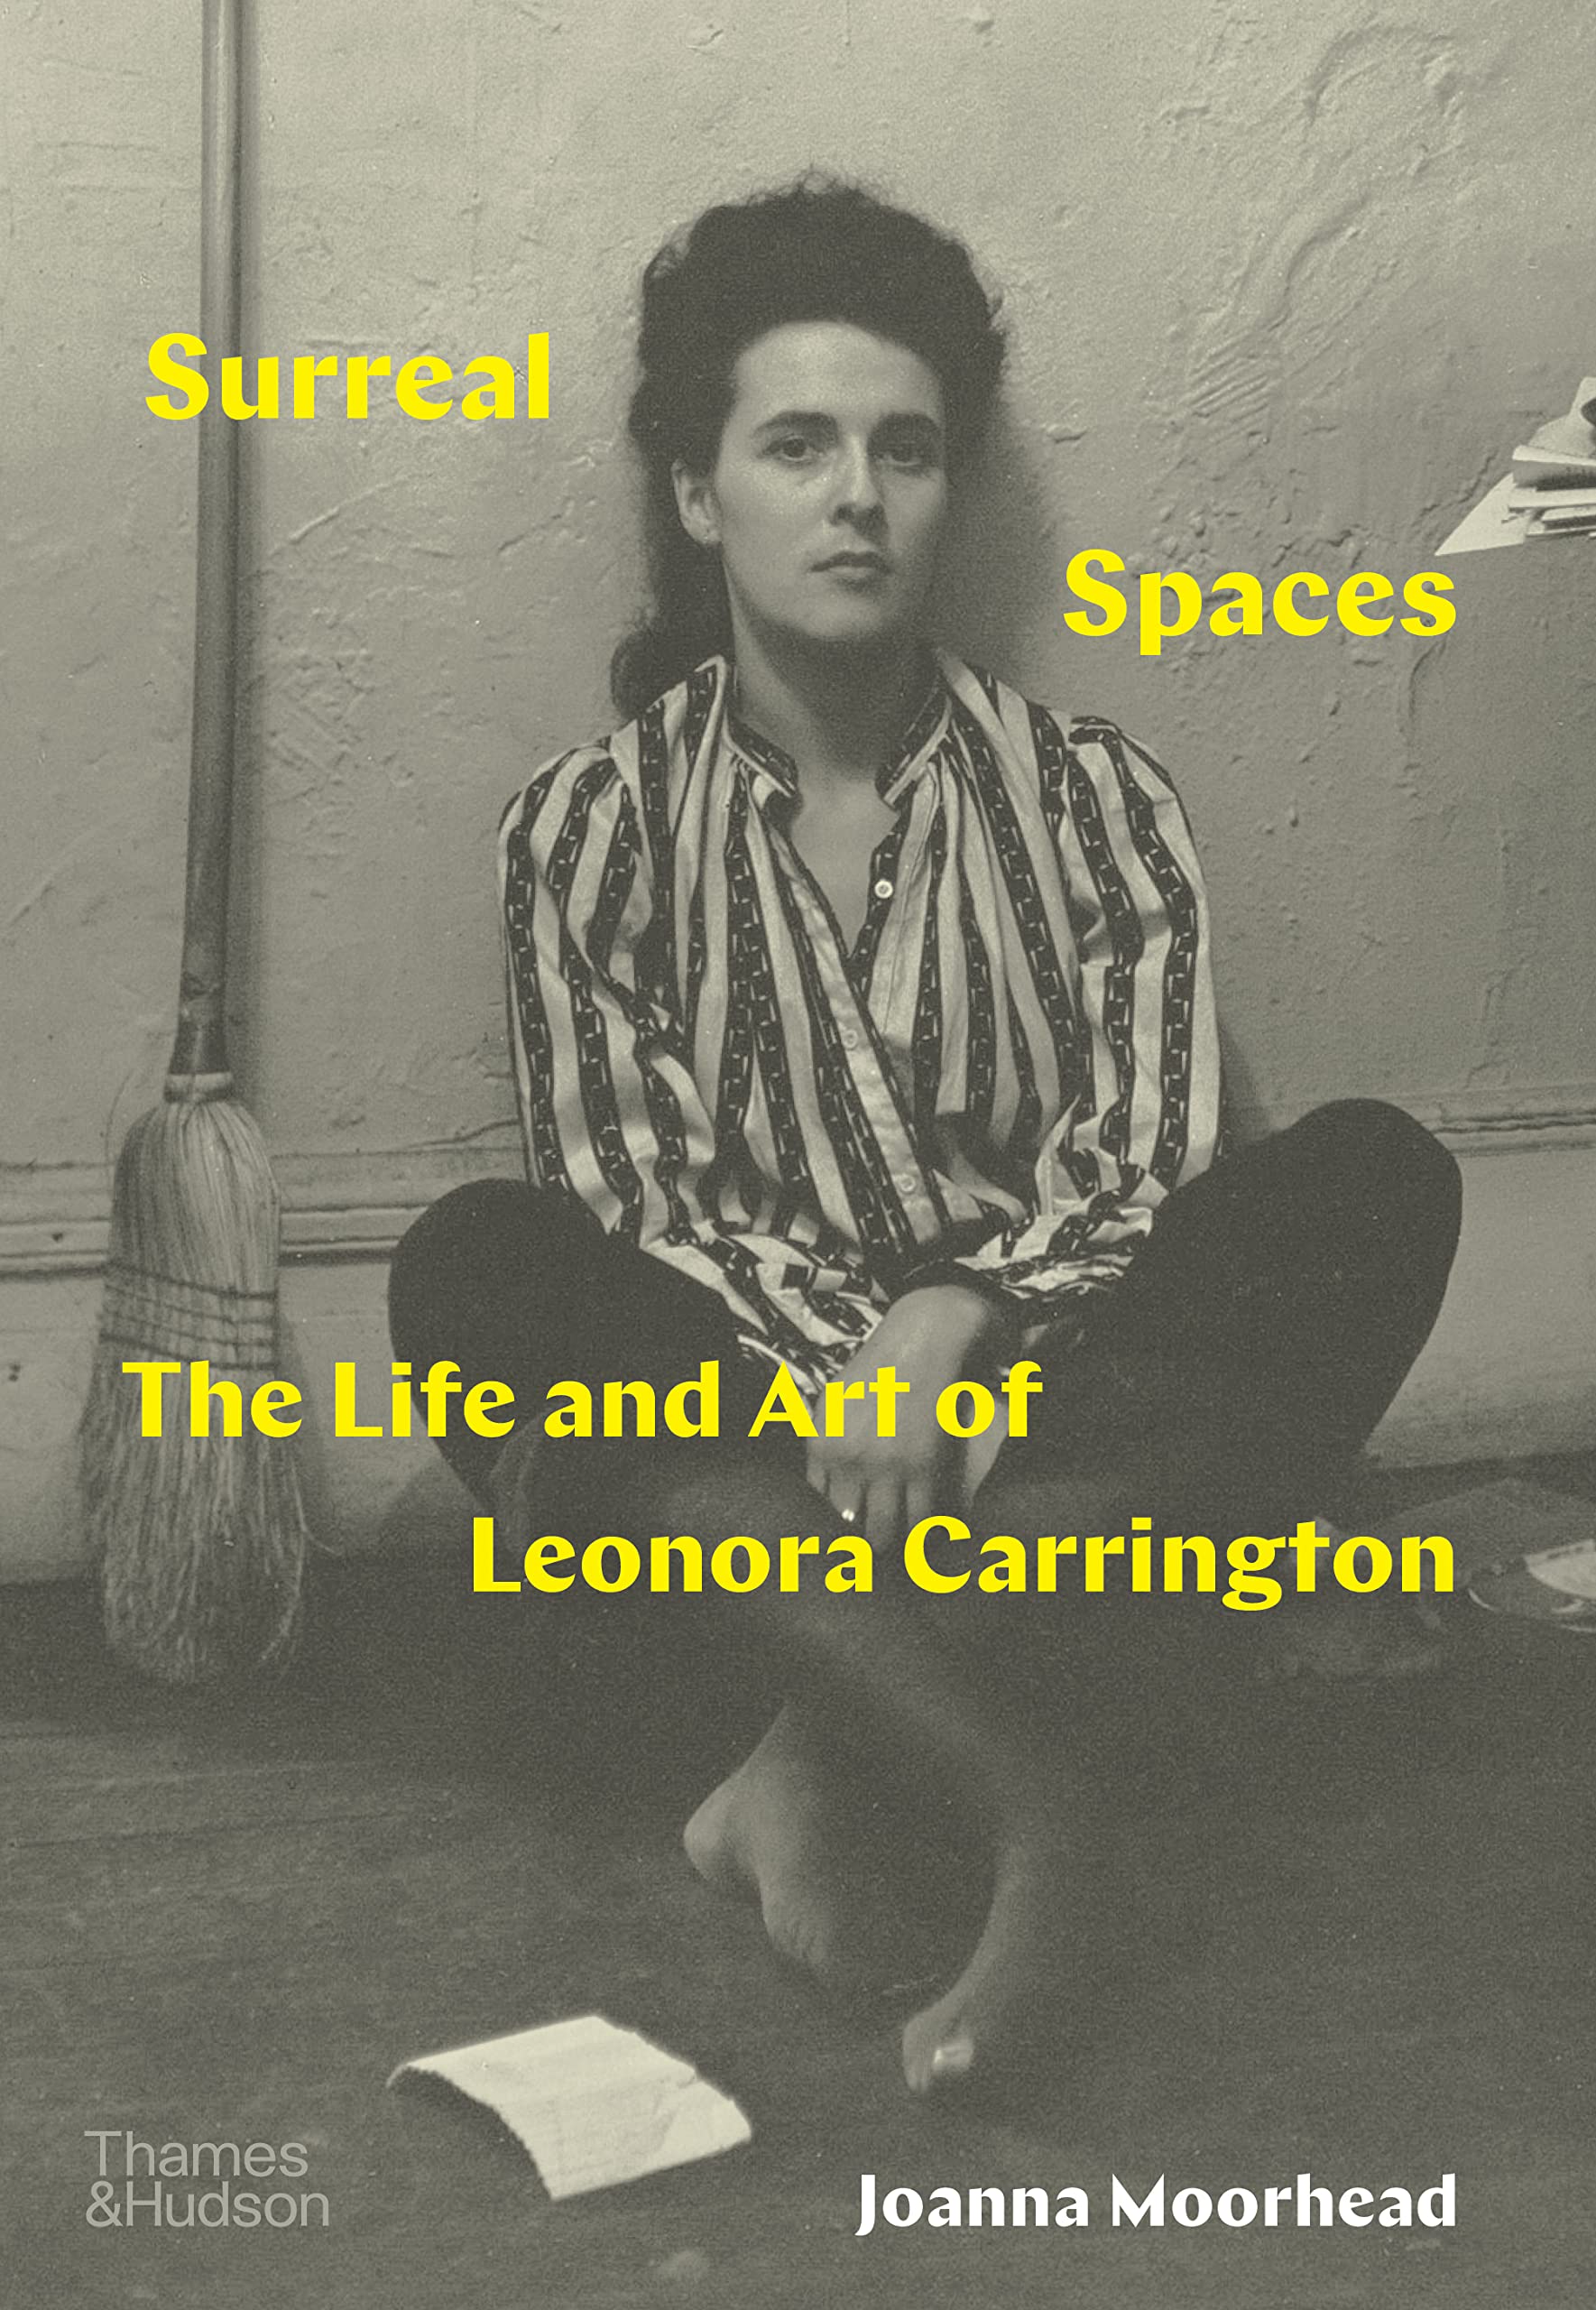 Surreal Spaces - The Life and Art of Leonora Carrington